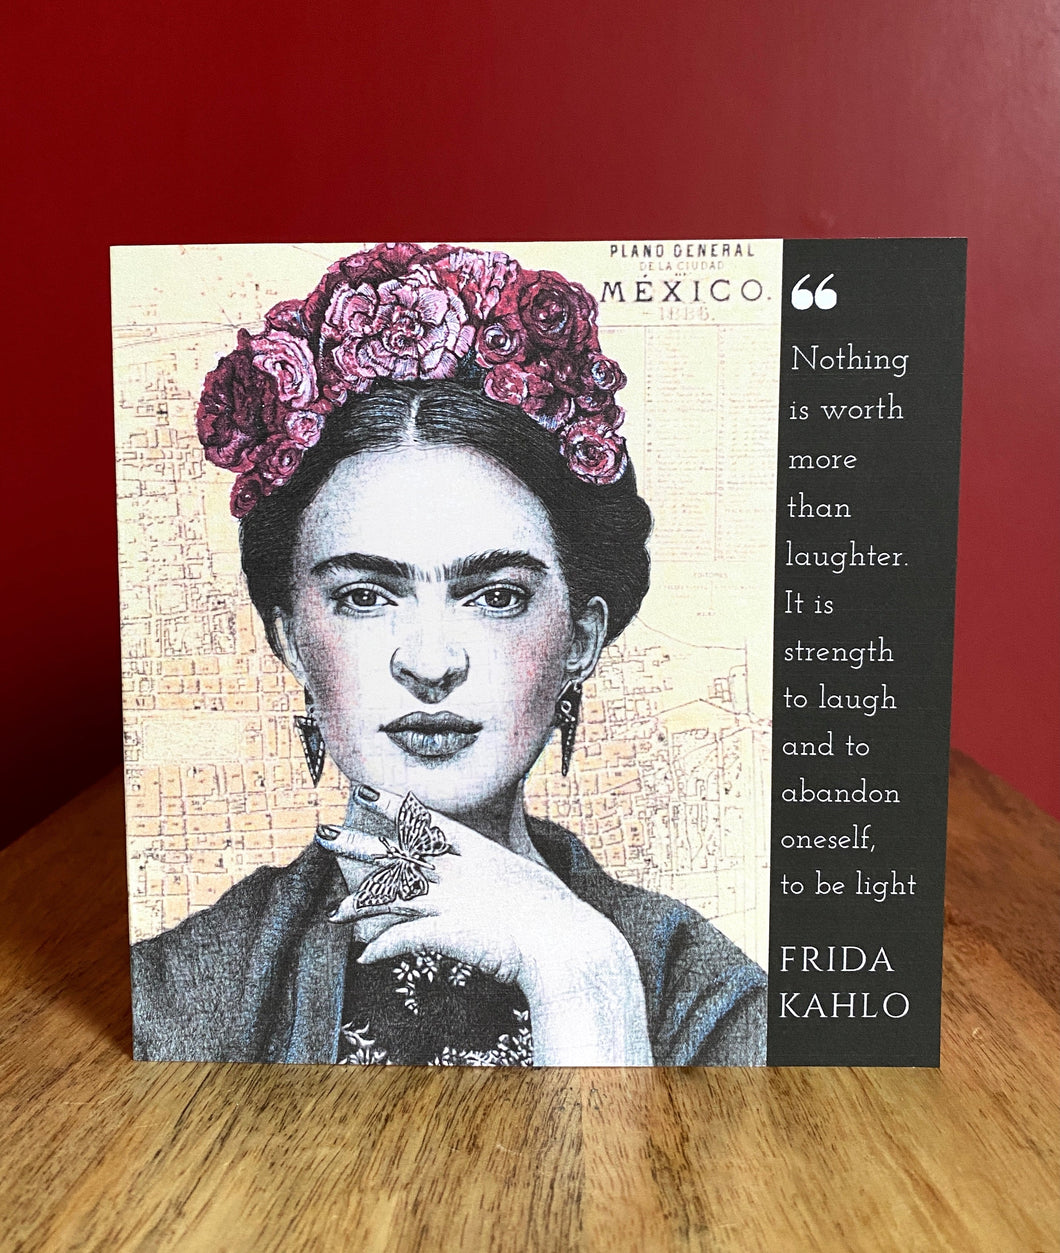 Frida Kahlo Inspired Greeting Card with quote. Blank inside